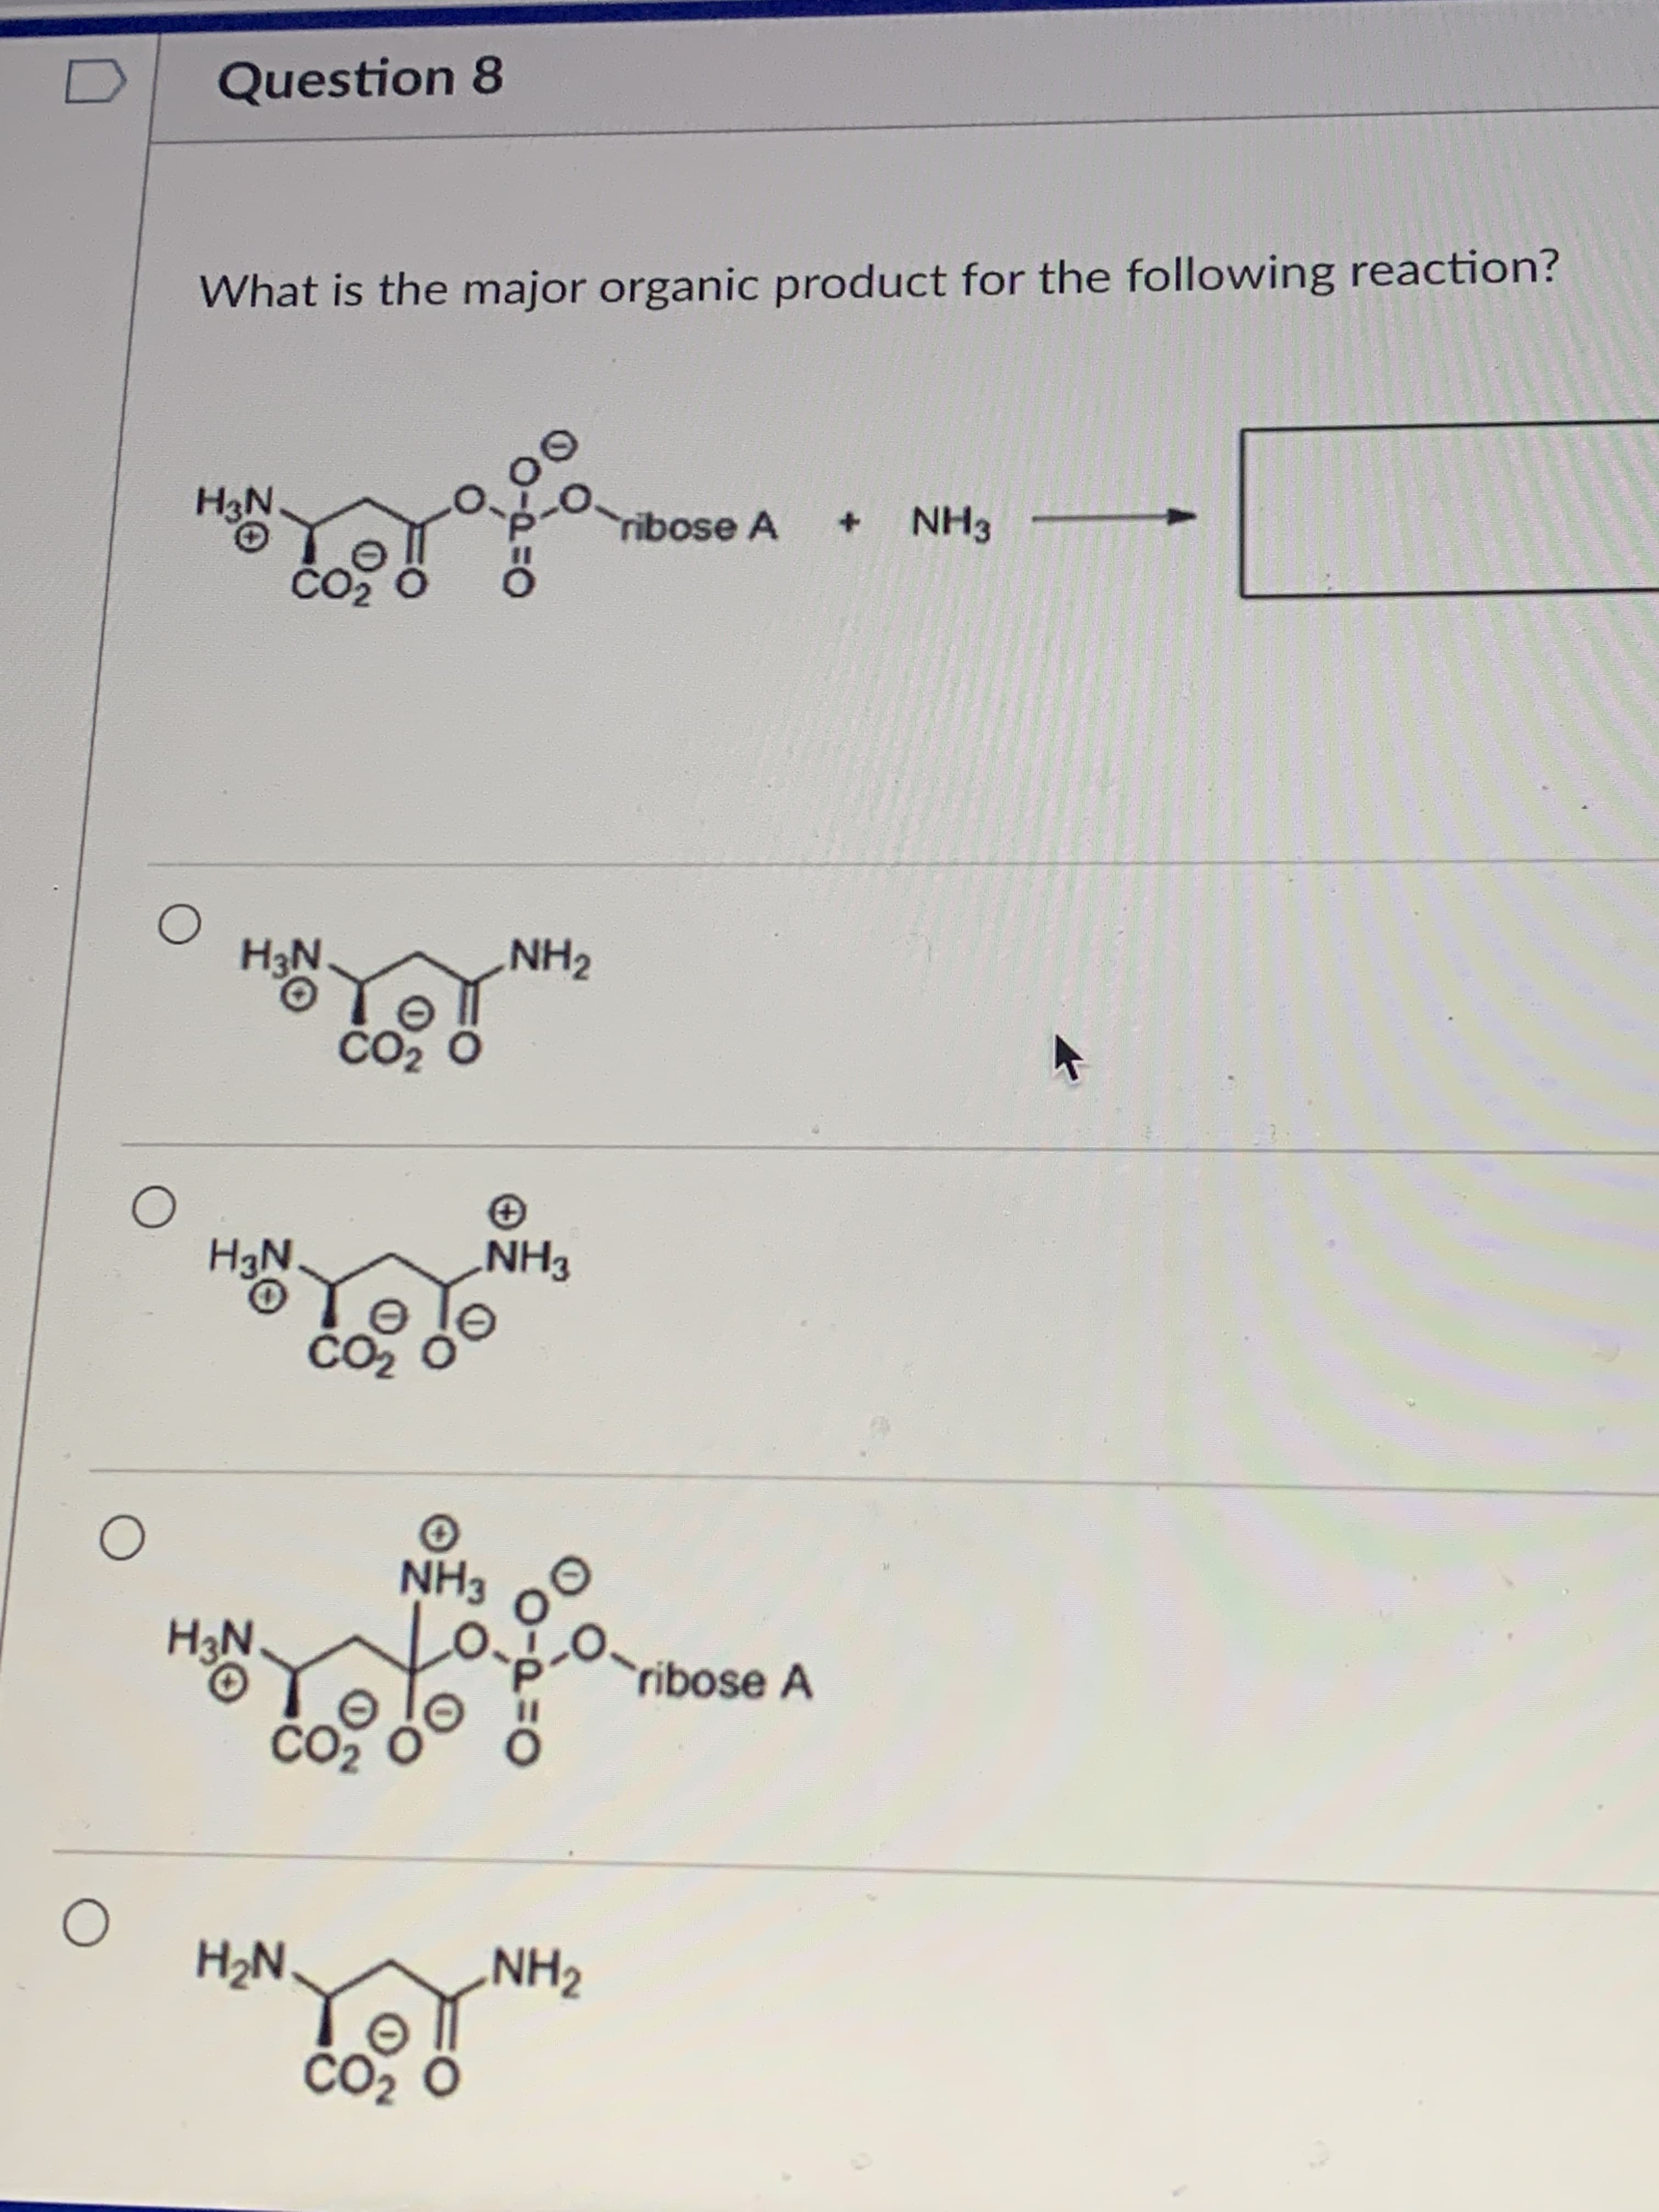 What is the major organic product for the following reaction?
H3N.
ribose A
NH3
ČO2
